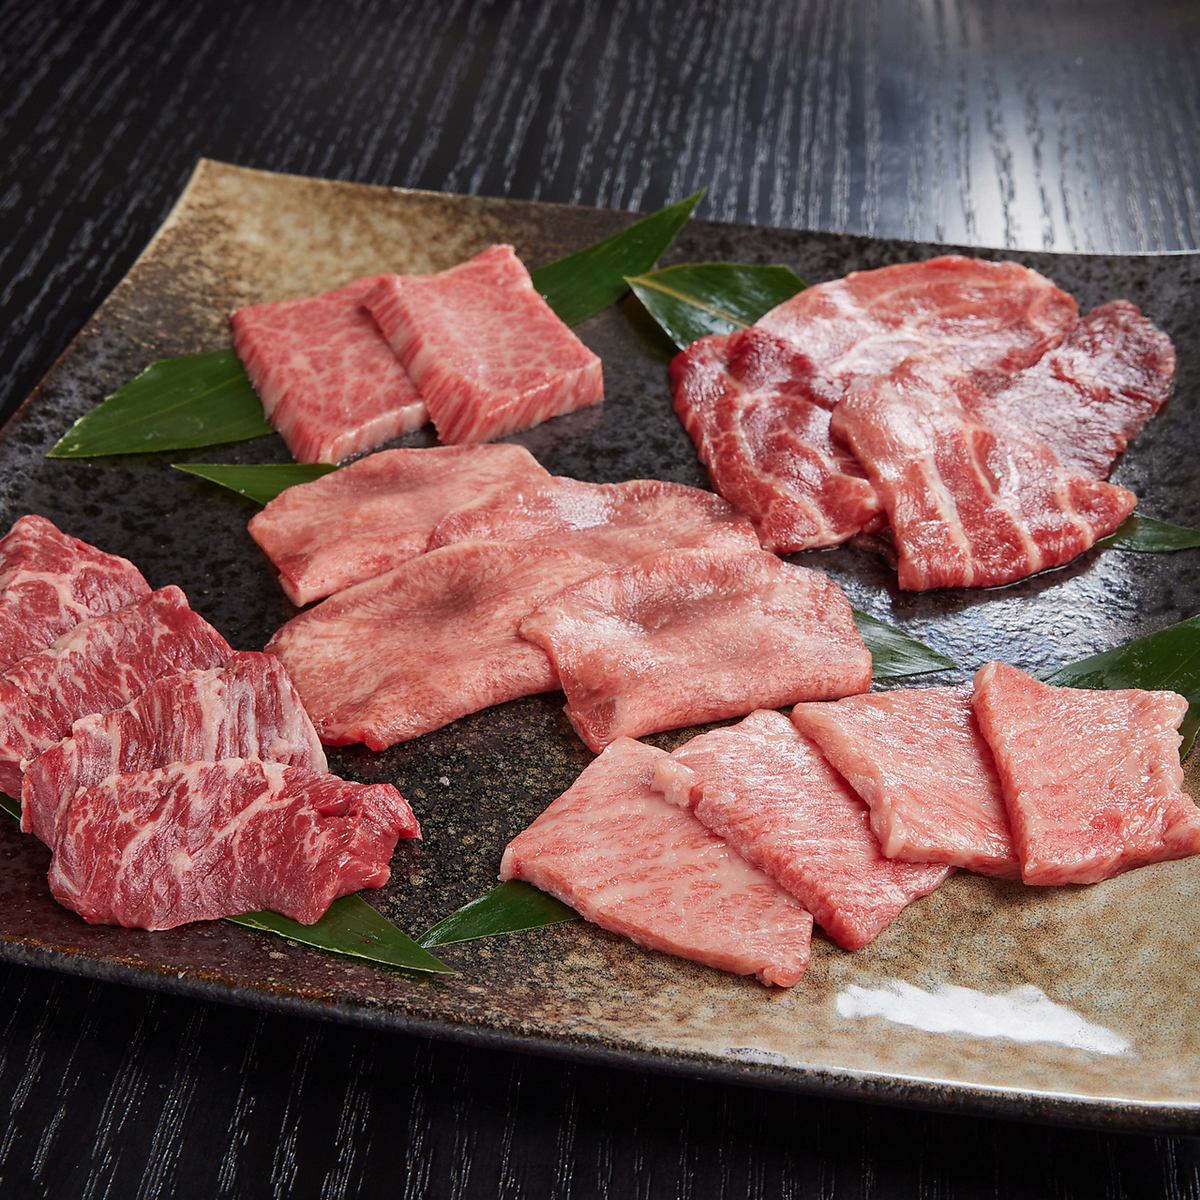 Please enjoy the exquisite yakiniku that is particular about the ingredients.